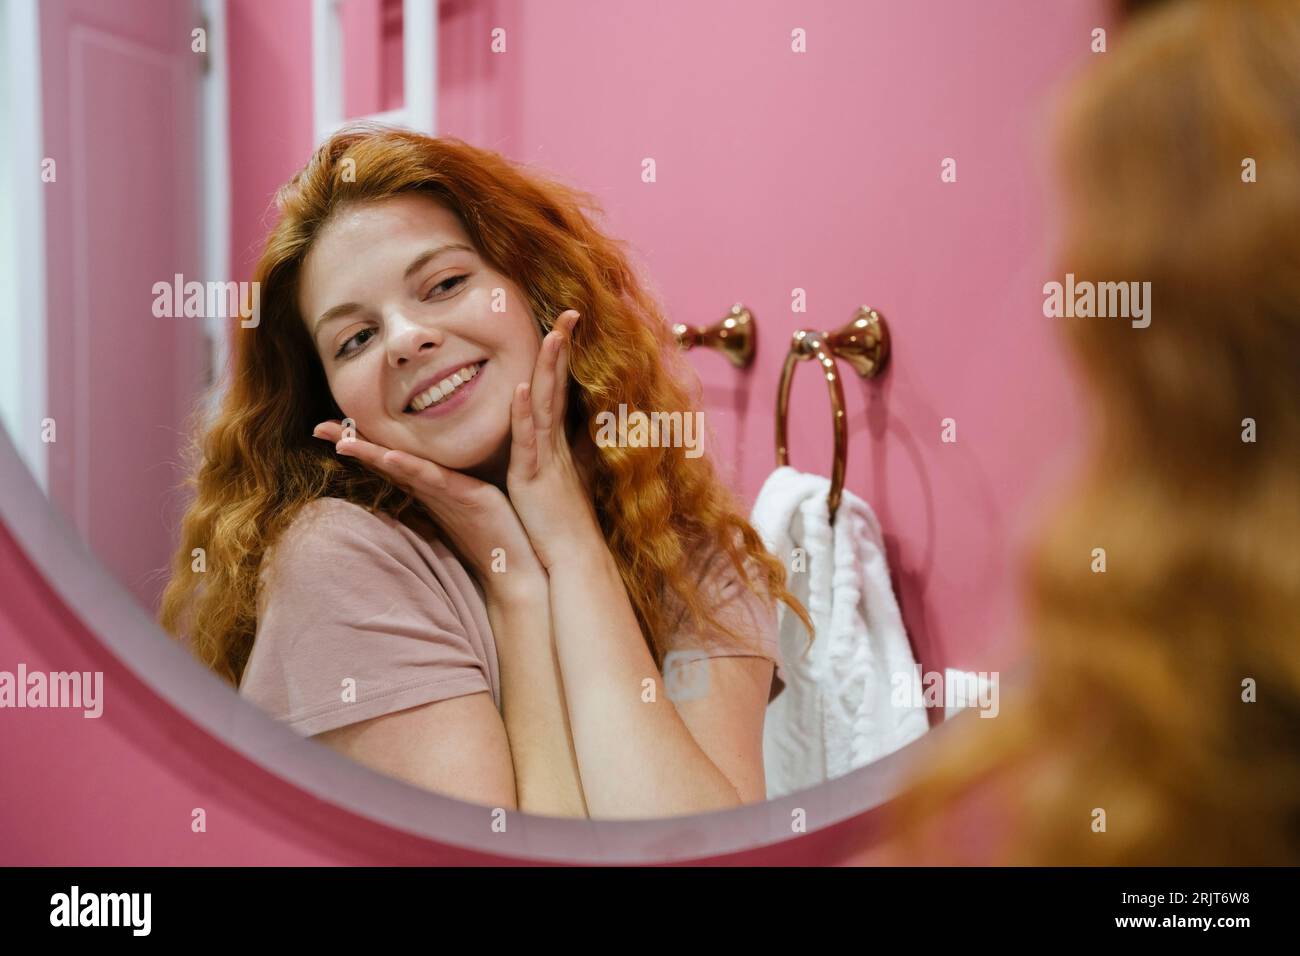 Reflection of young woman touching face in bathroom mirror Stock Photo